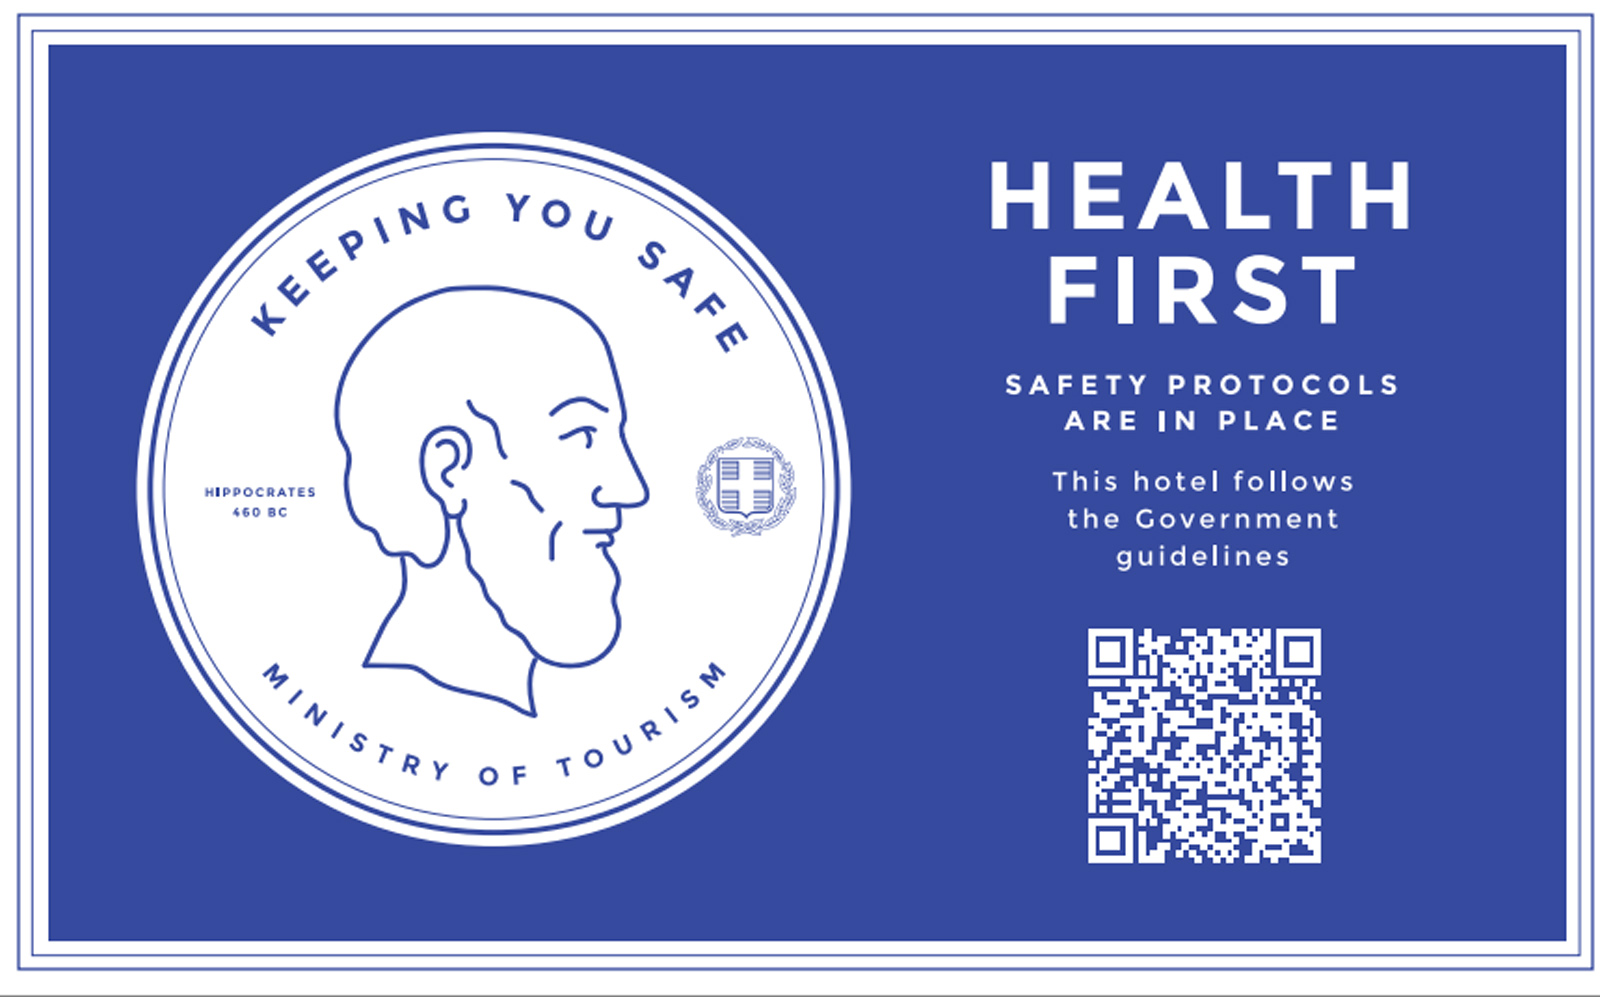 Health first sign